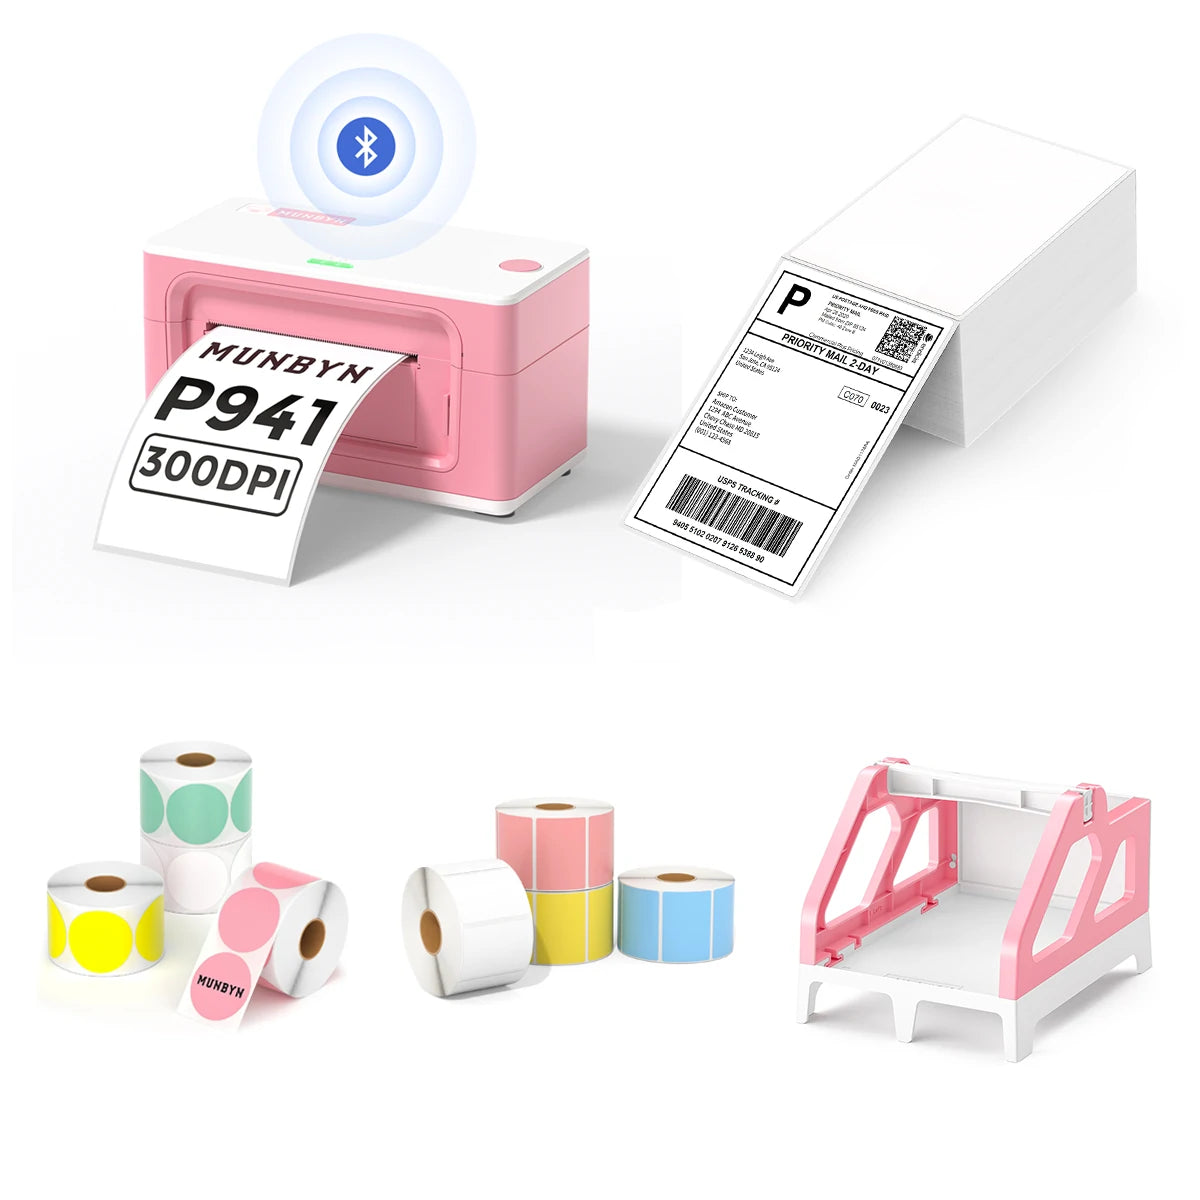 The MUNBYN 941B pink Bluetooth label printer kit includes a printer, a label roll holder, eight rolls of coloured labels, and a stack of shipping labels